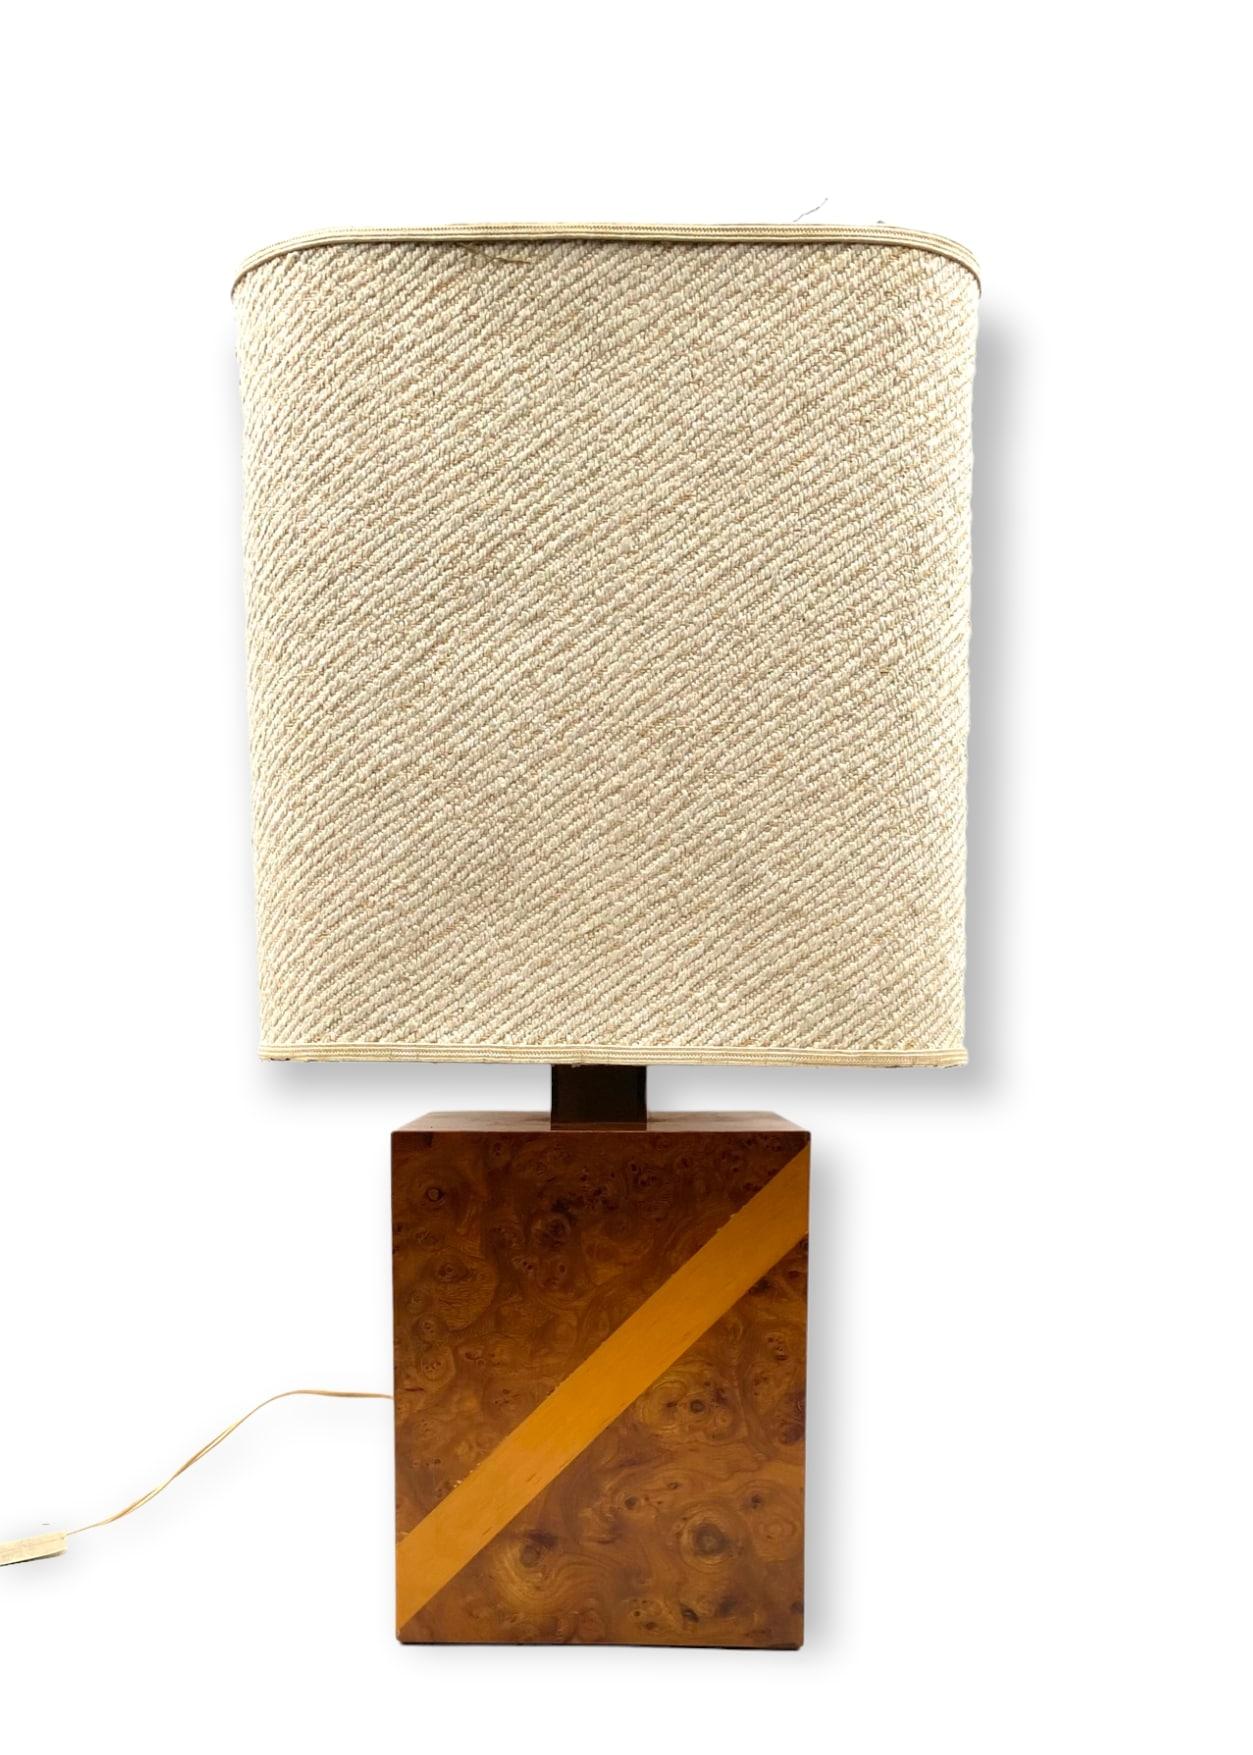 Hollywood Regency Cubic Wood and Brass Table Lamp, Italy, 1970s For Sale 2